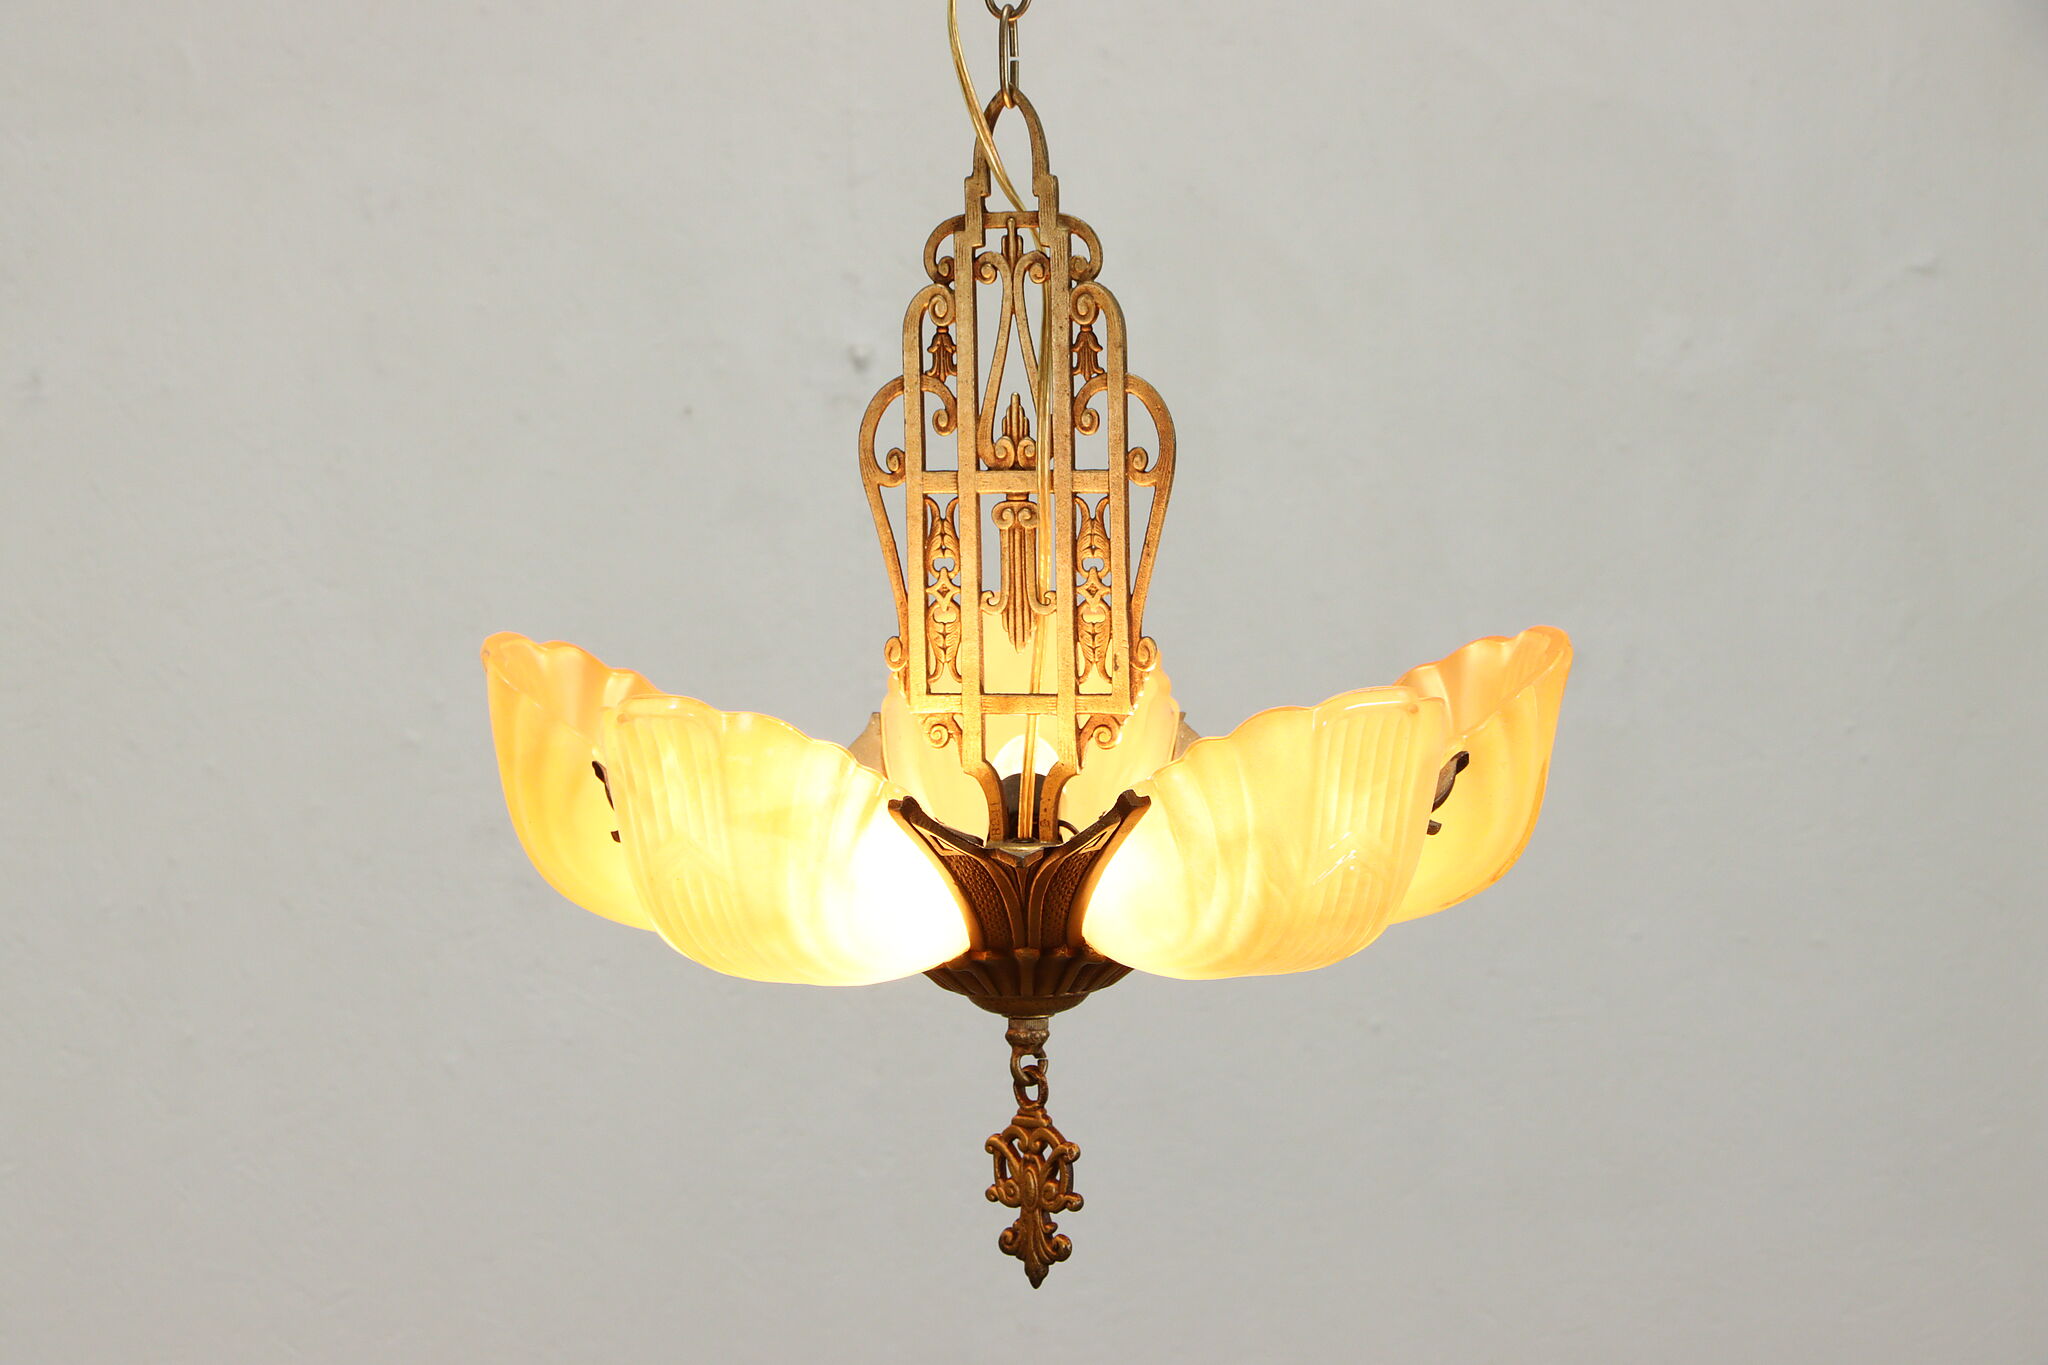 Antique Markel lighting Rustic farmhouse country chandelier ceiling light fixture Markel Electric Products art deco 5 light fixture Old